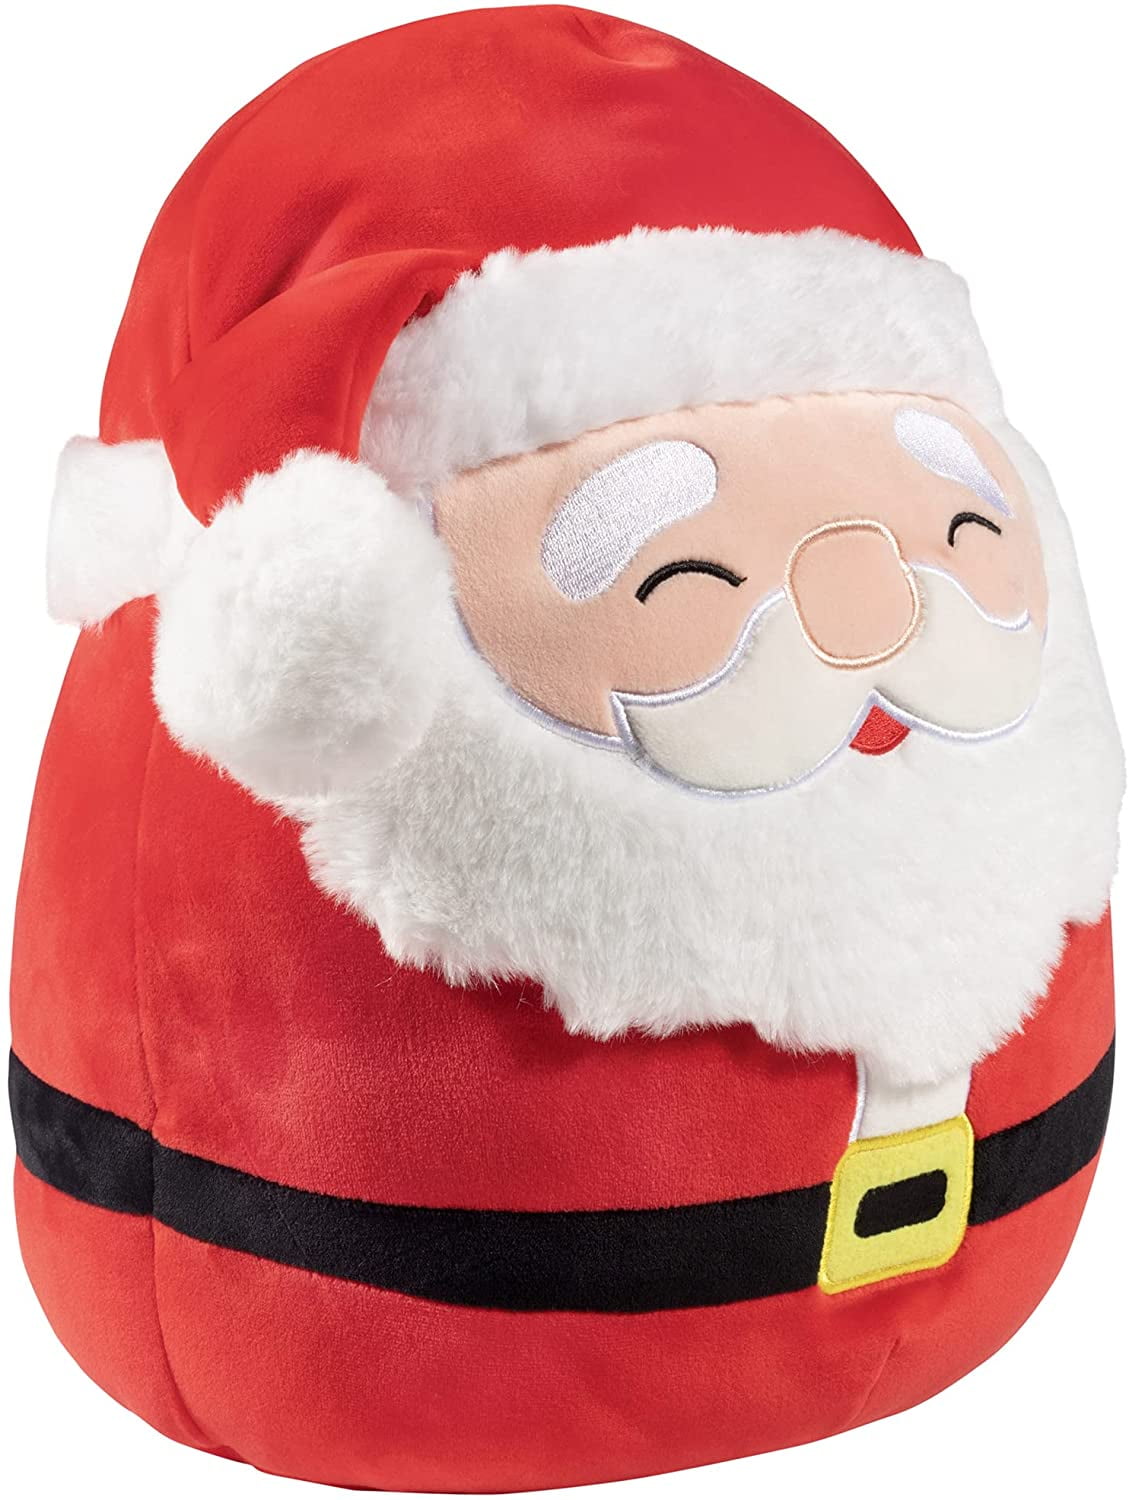 Squishmallow Nick Santa Claus 4.5 Inch  Plush  New For Christmas 2020 Has Tags 